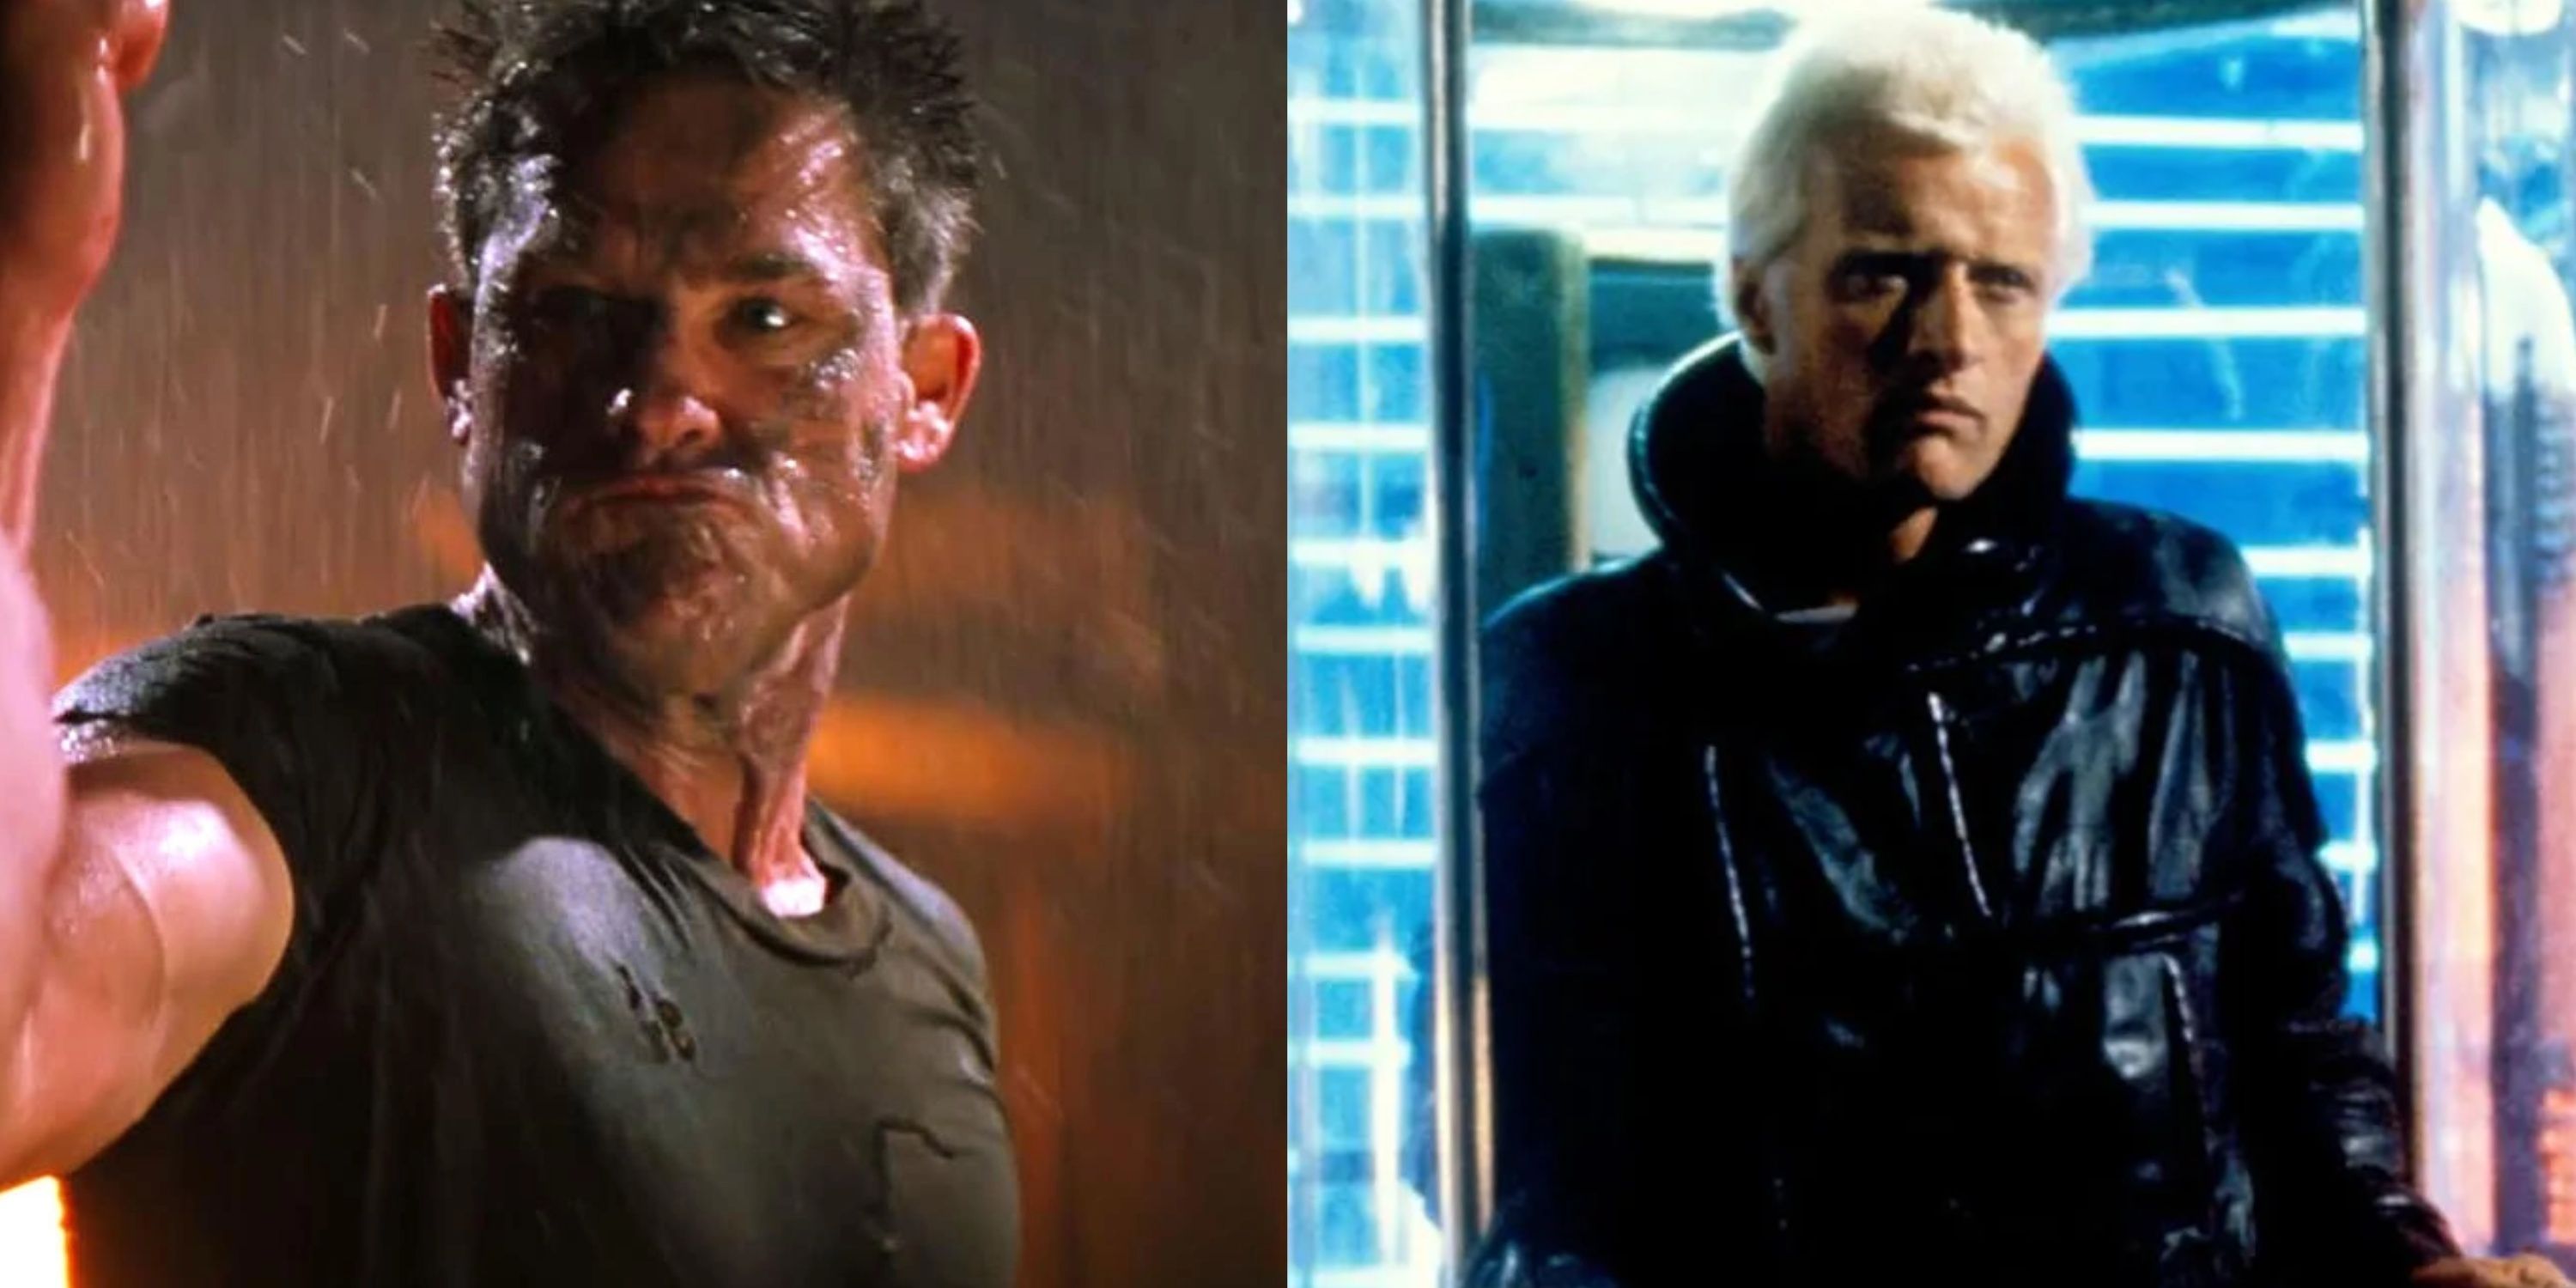 Soldier and Blade Runner 2x1